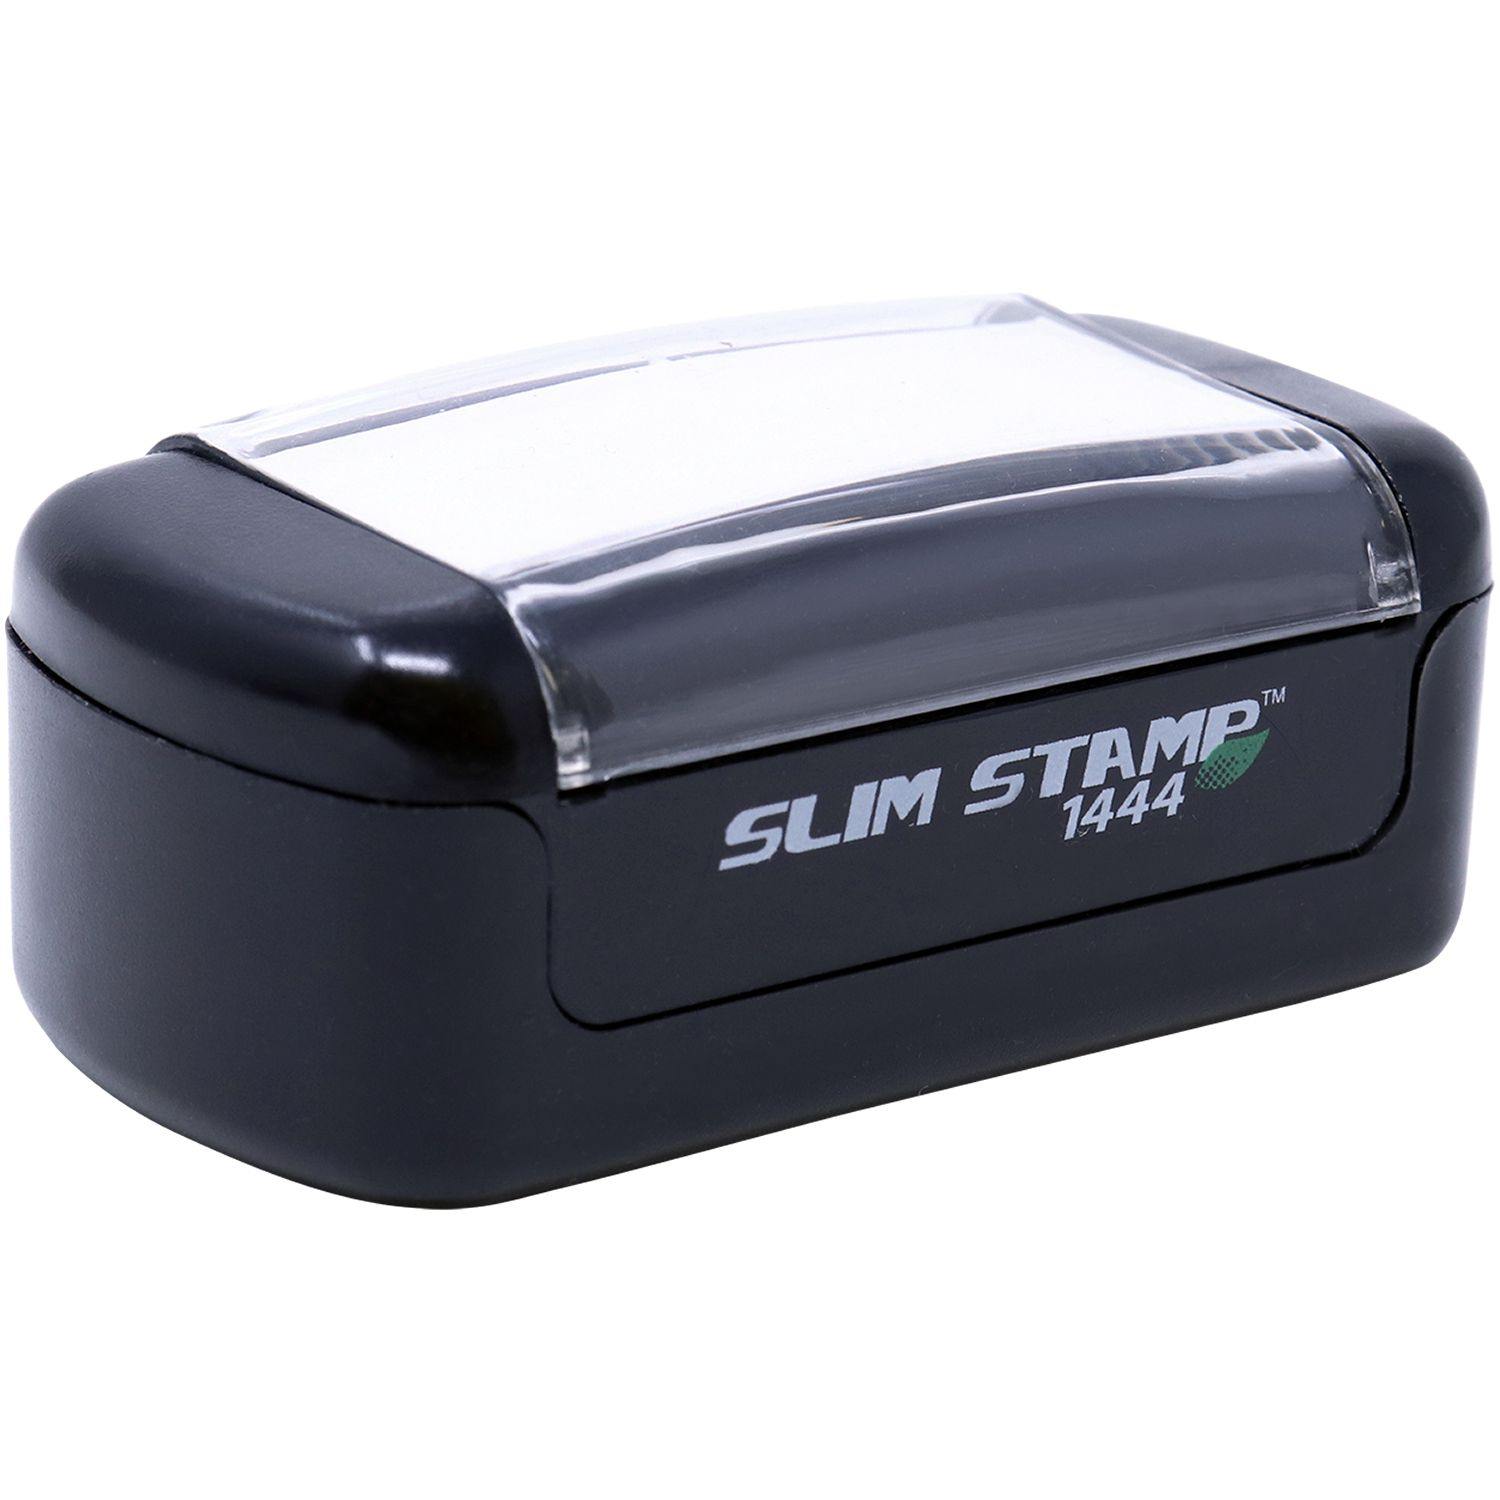 Alt View of Slim Pre-Inked Please Review with your child Stamp Mount Angle